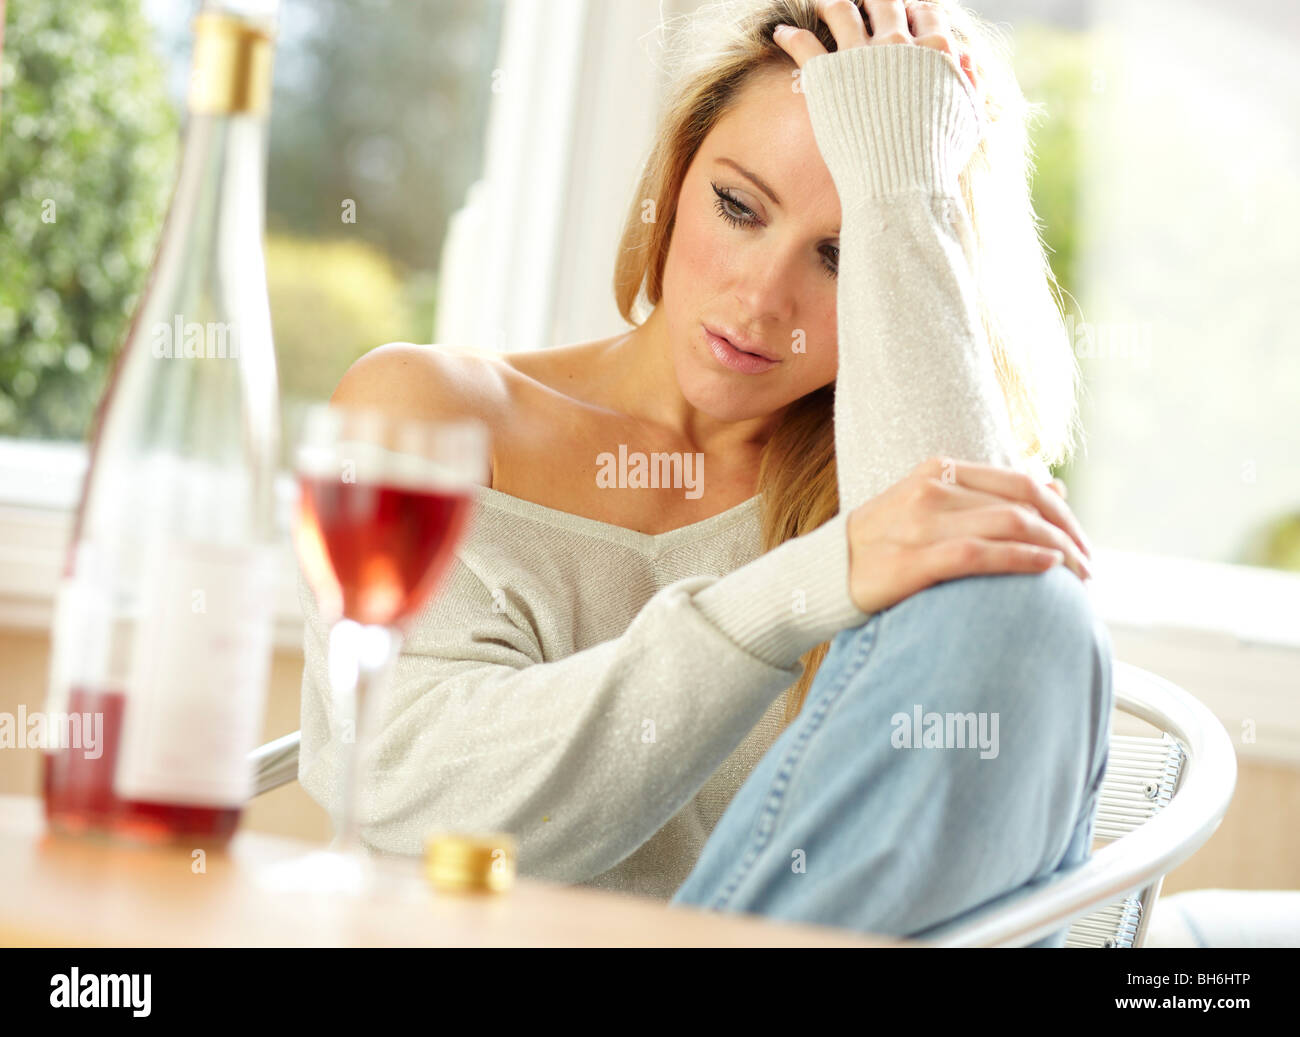 Woman drinking wine Banque D'Images